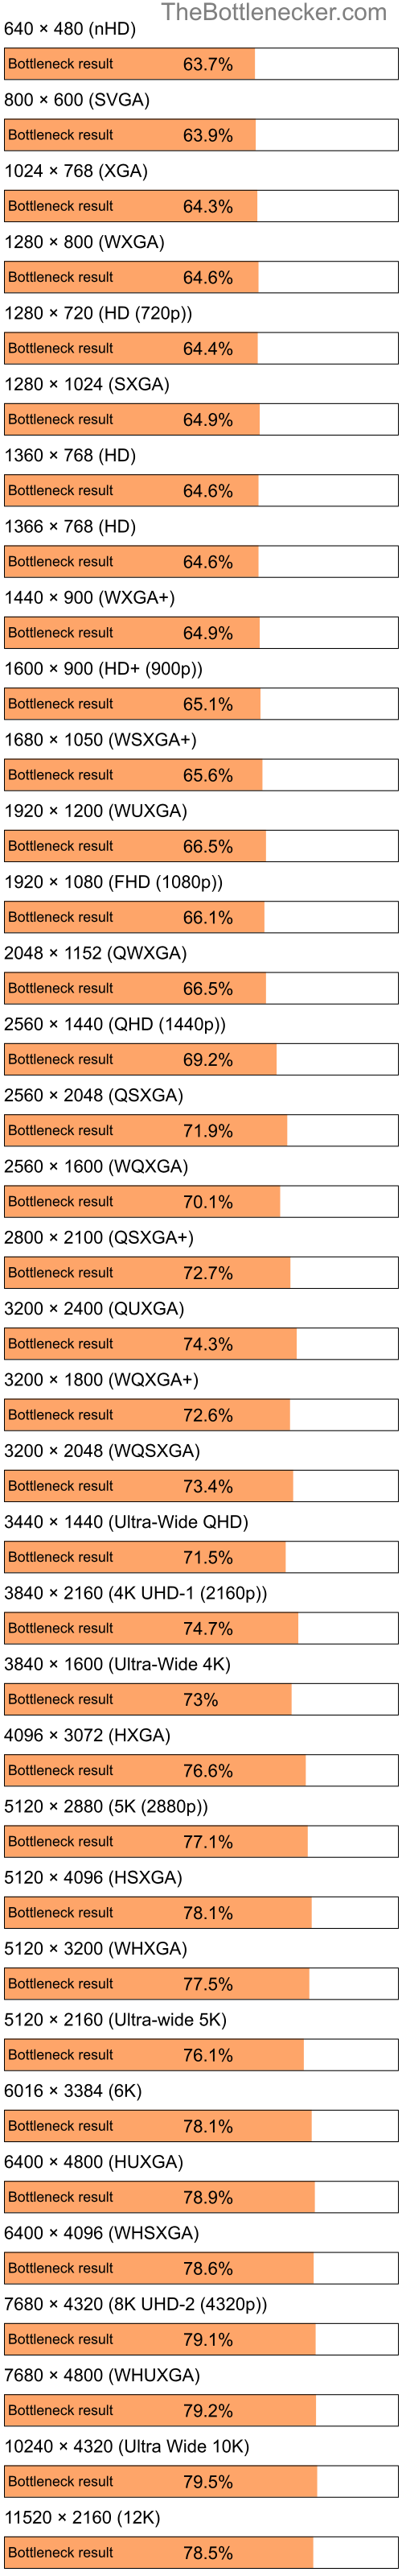 Bottleneck results by resolution for Intel Atom N280 and AMD Radeon HD 7290 in7 Days to Die